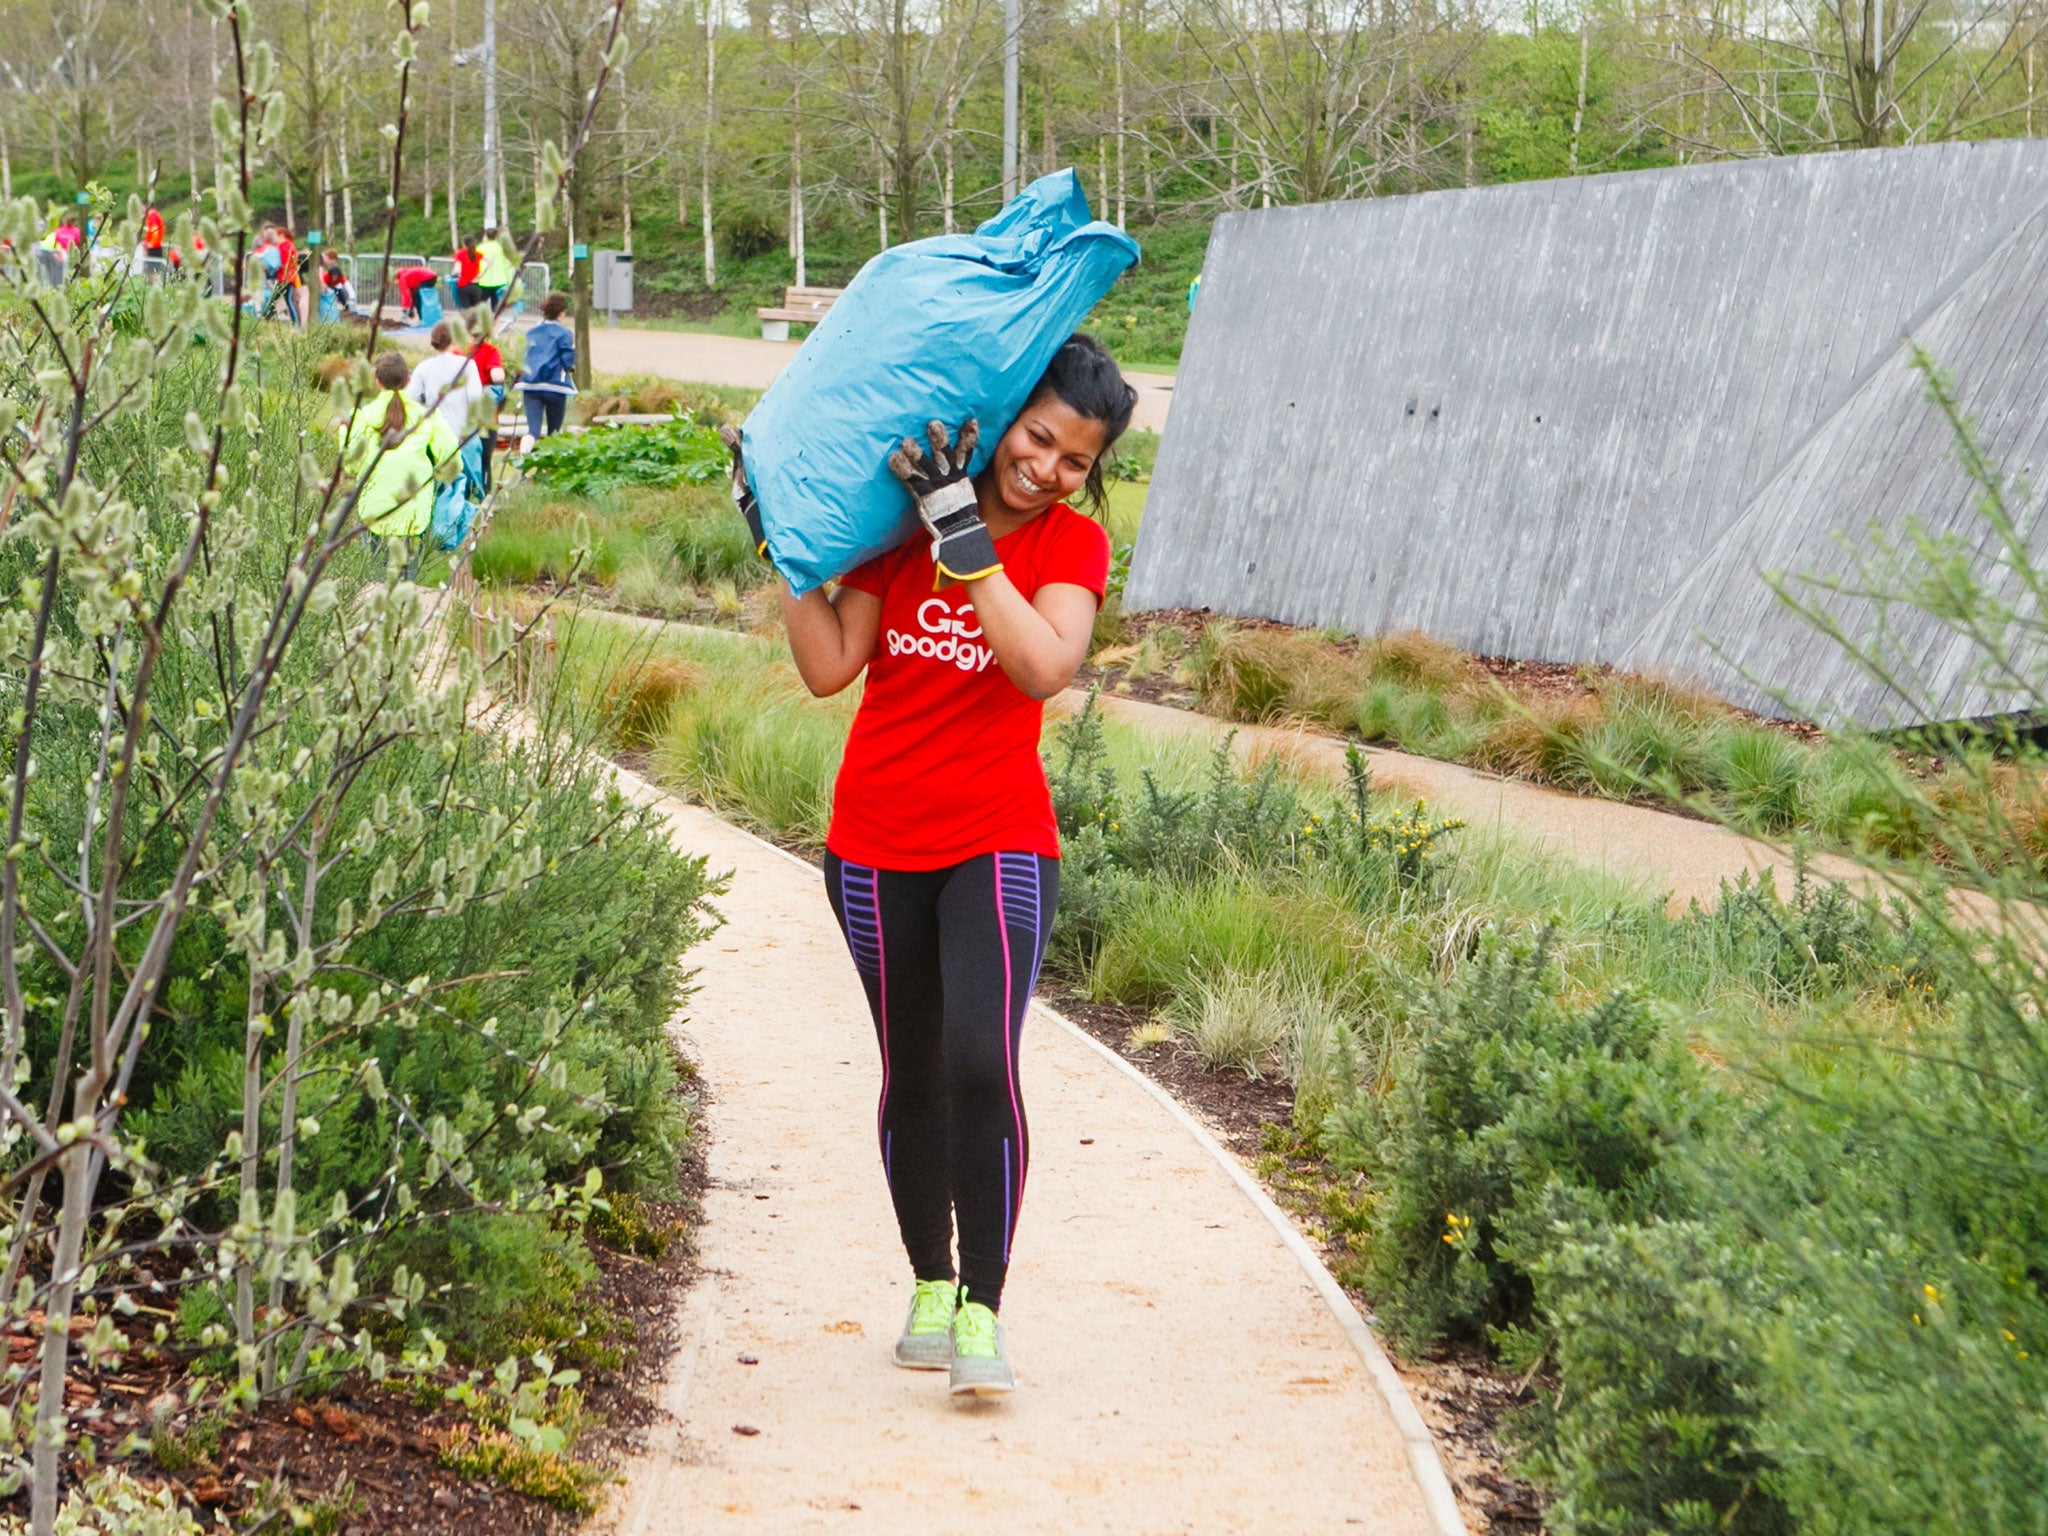 Fit for something: members of the GoodGym at work on their community projects